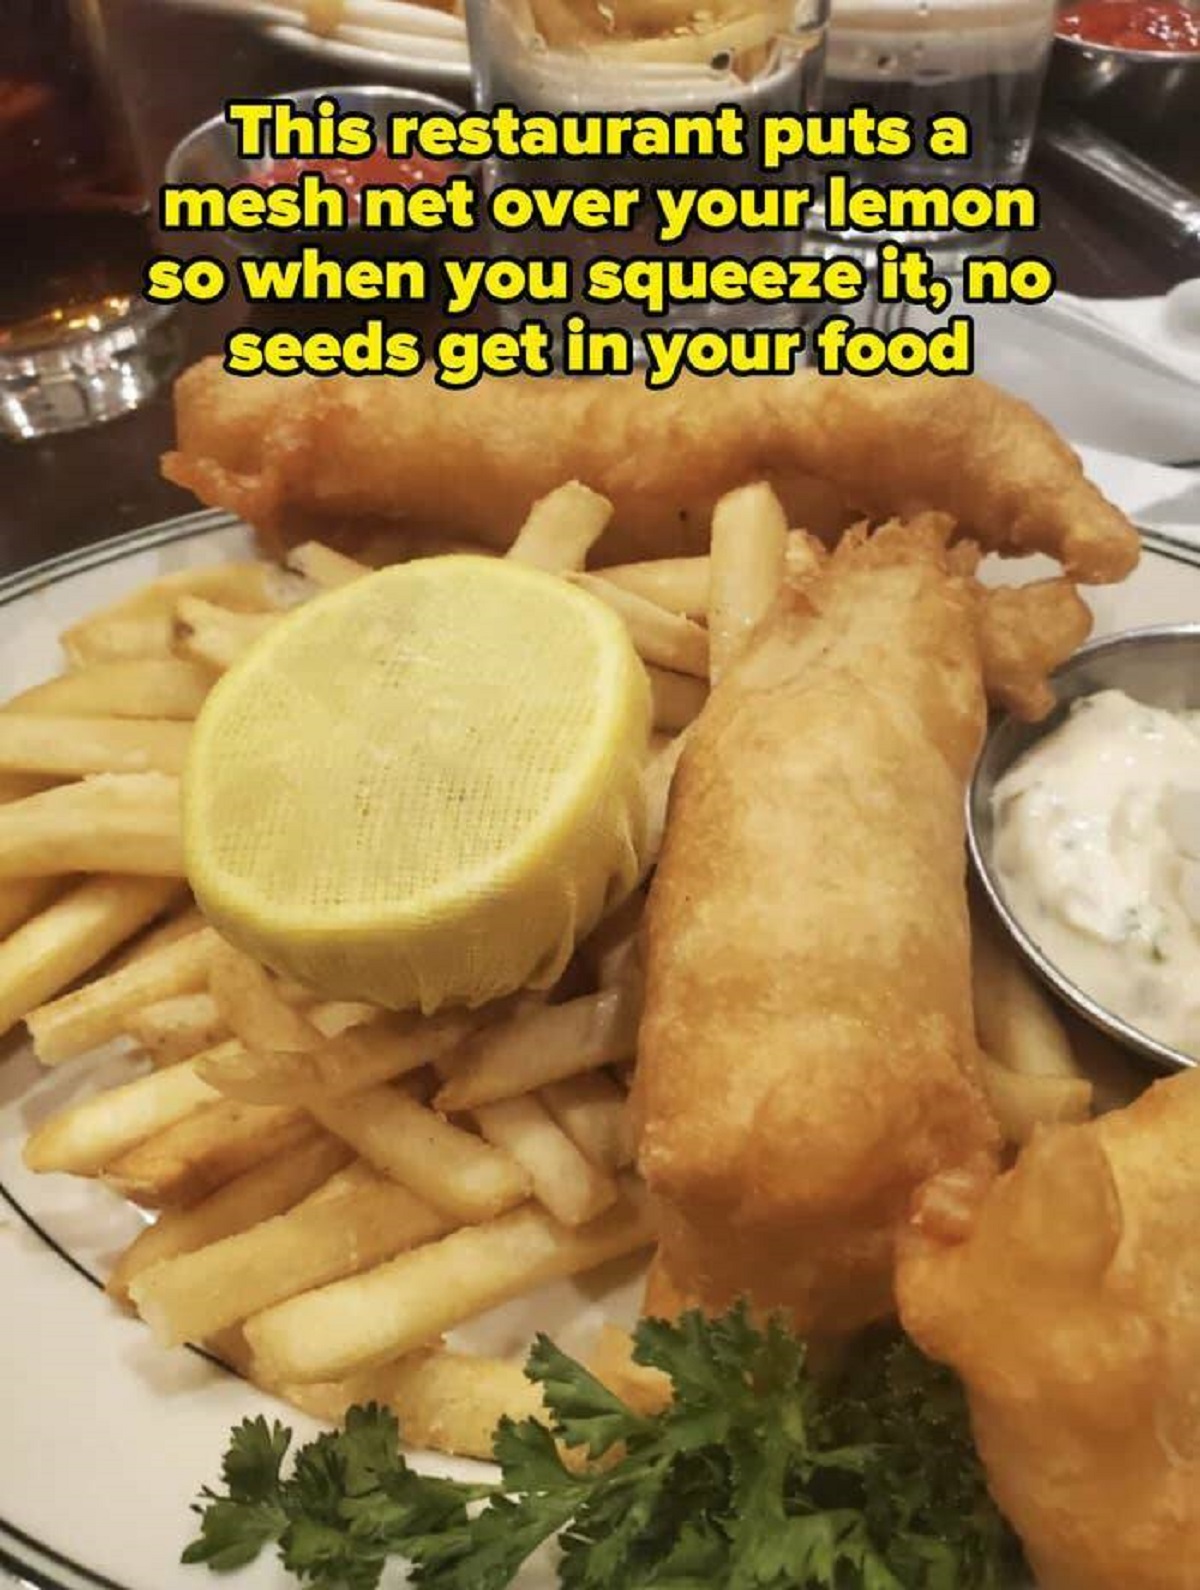 fish and chips - This restaurant puts a mesh net over your lemon so when you squeeze it, no seeds get in your food